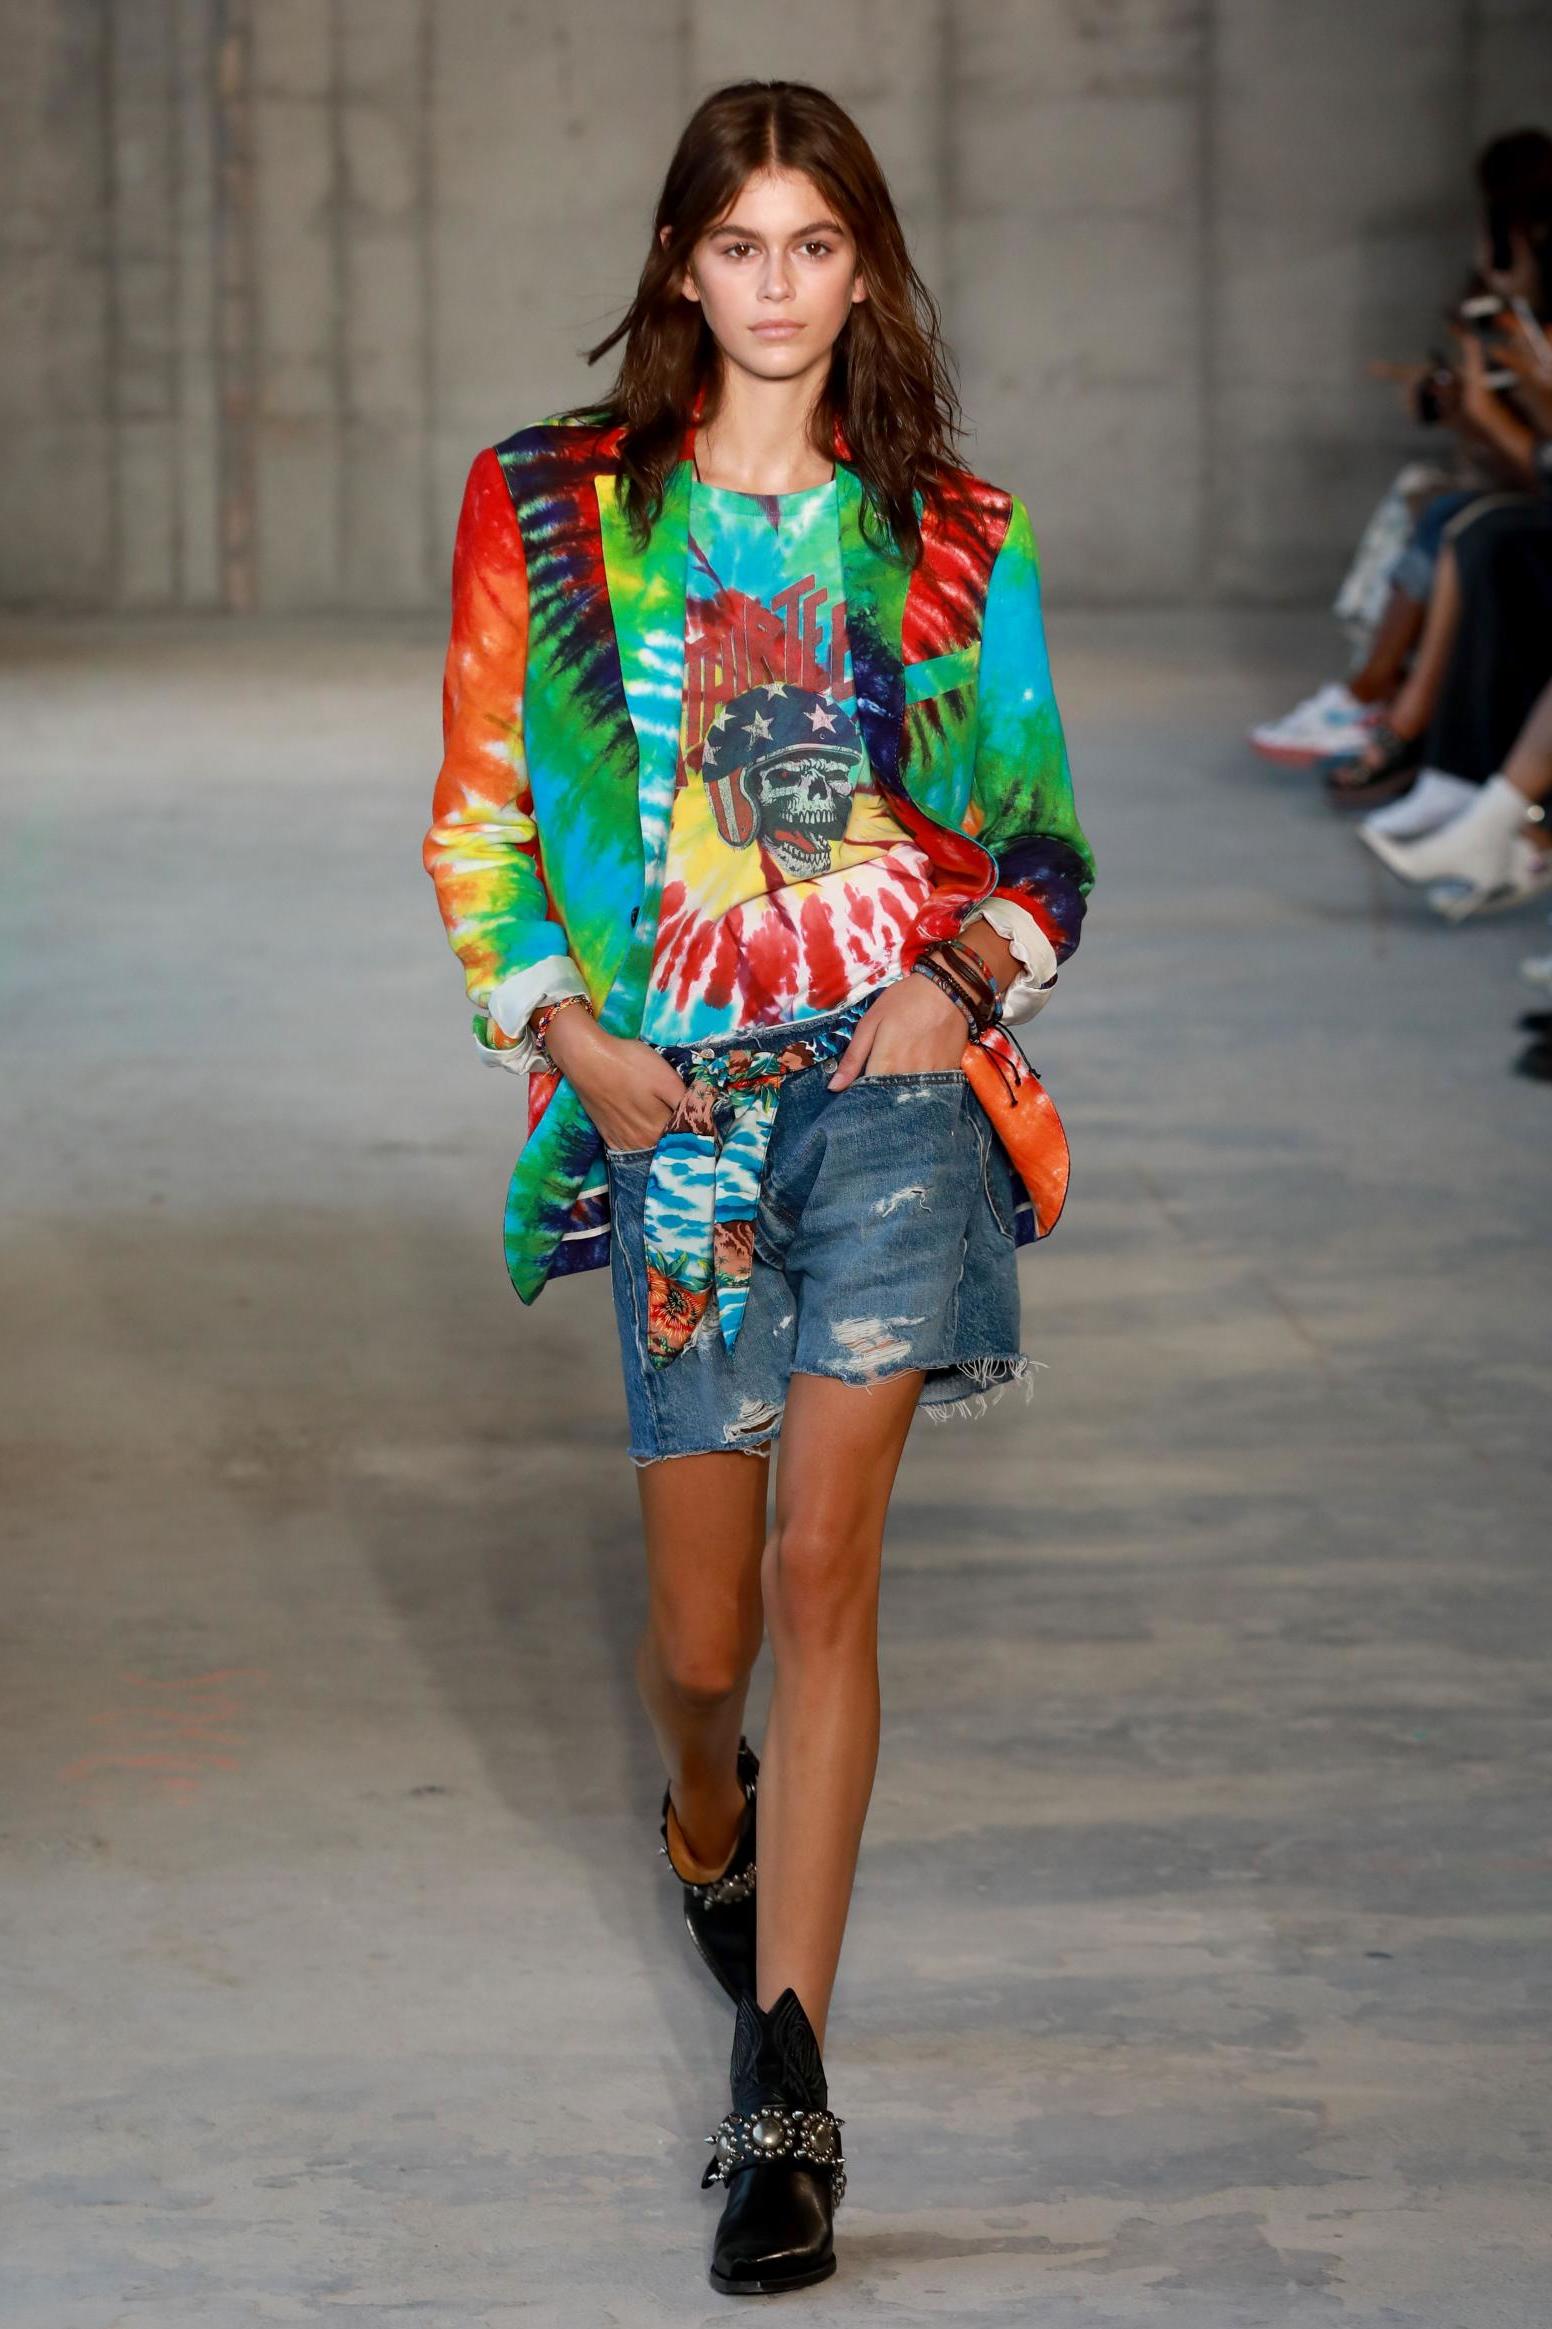 LOUIS VUITTON INCREASES TIE DYE IN THE SUMMER FASHION COLLECTION